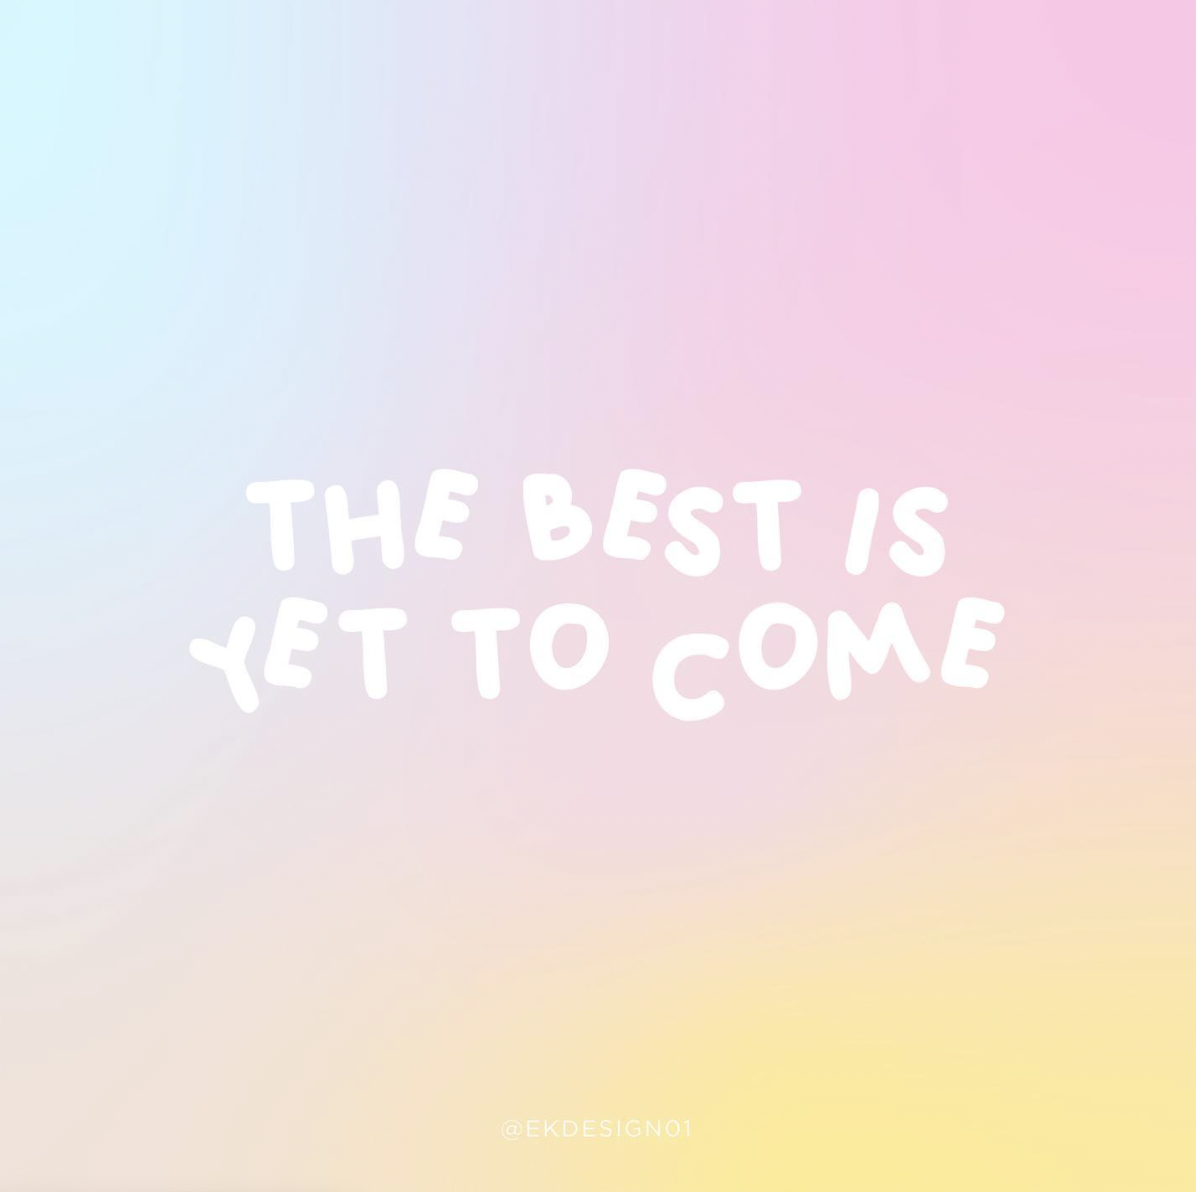 "the best is yet to come"